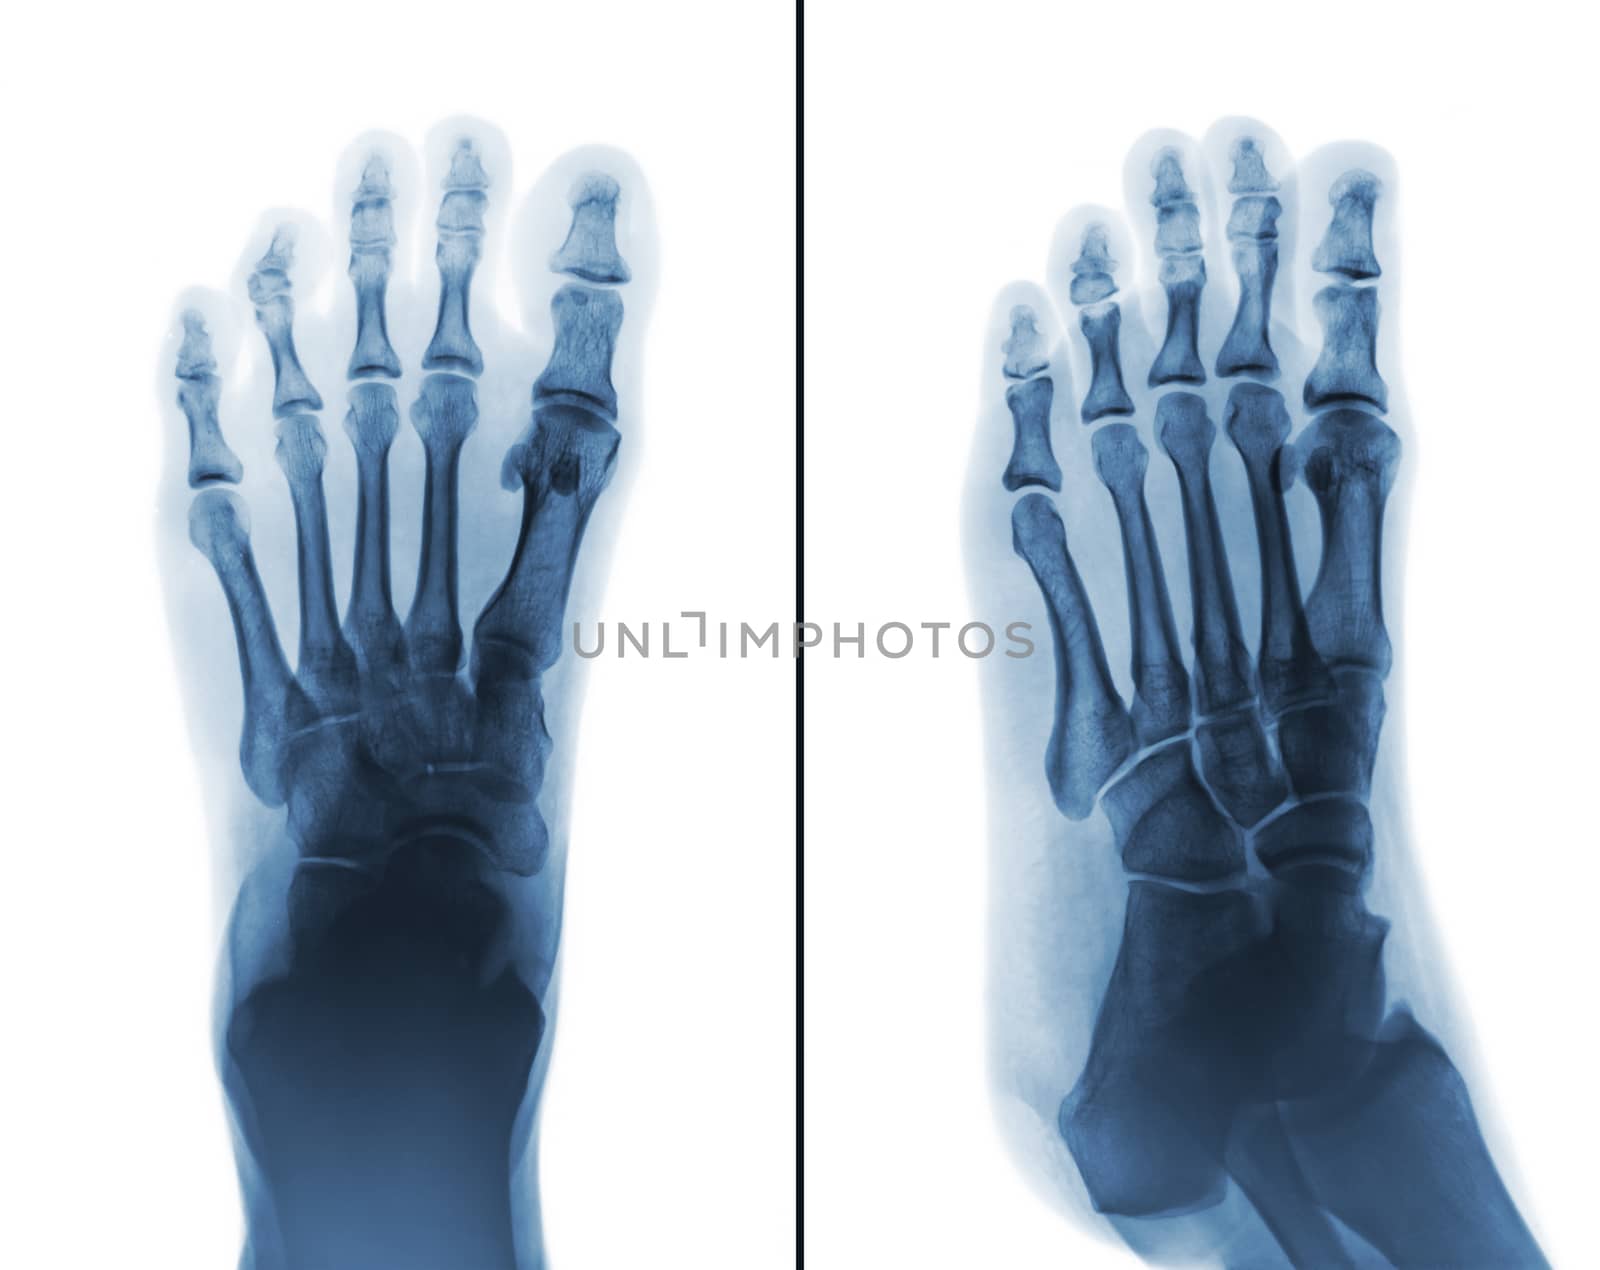 Film x-ray both normal human foots . 2 position ( front view and side view )